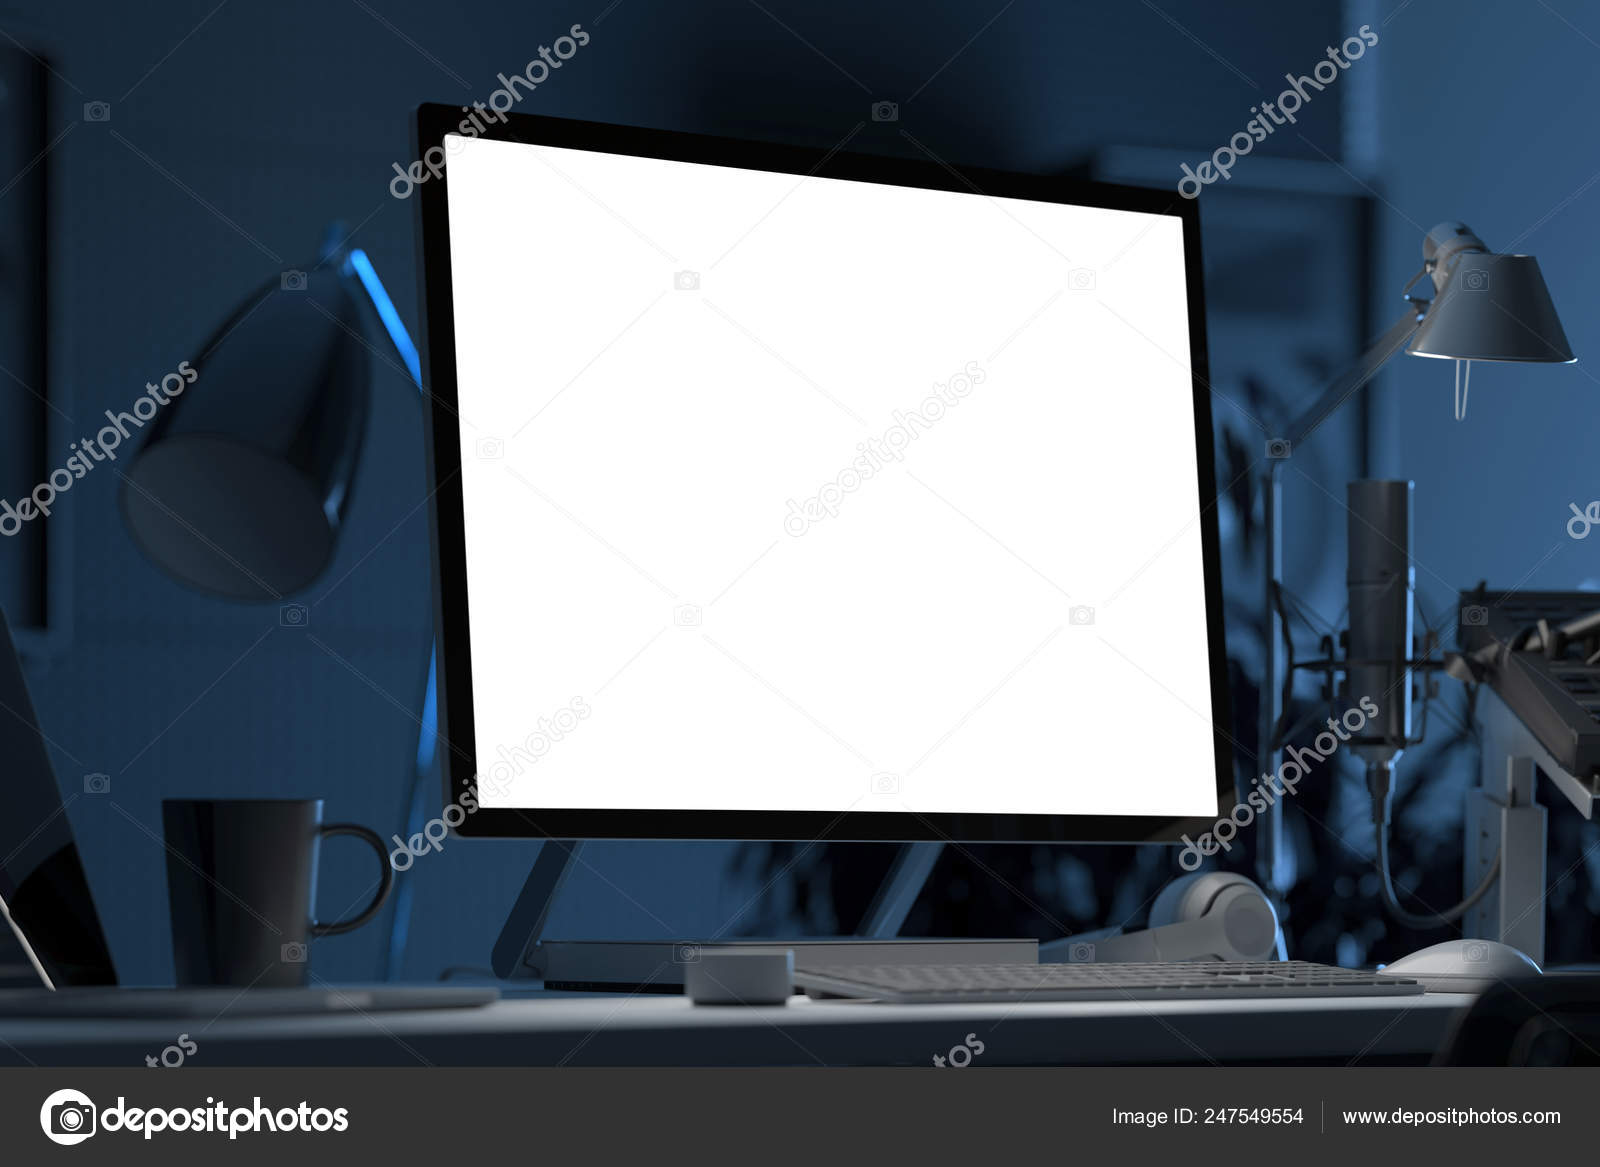 Black Realistic Pc With Big Blank Monitor On Desk In Dark Room 3d